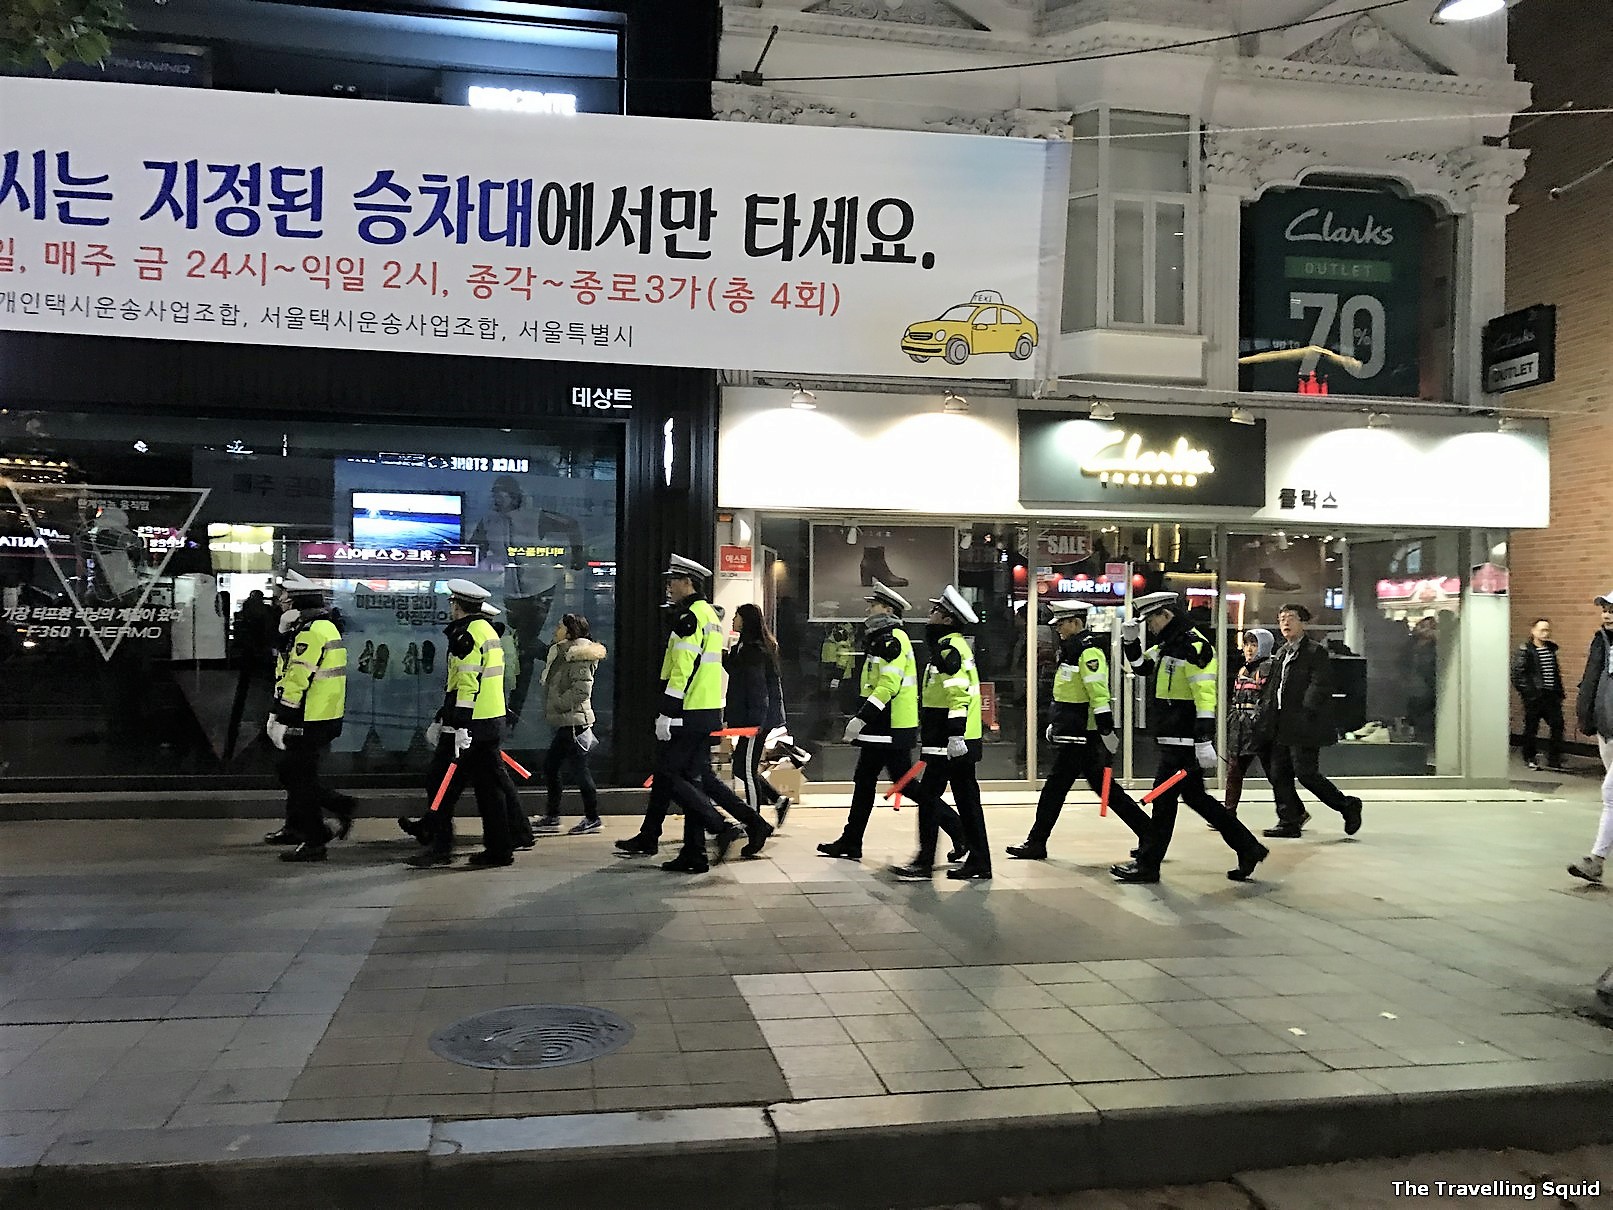 visit Seoul while protests are ongoing